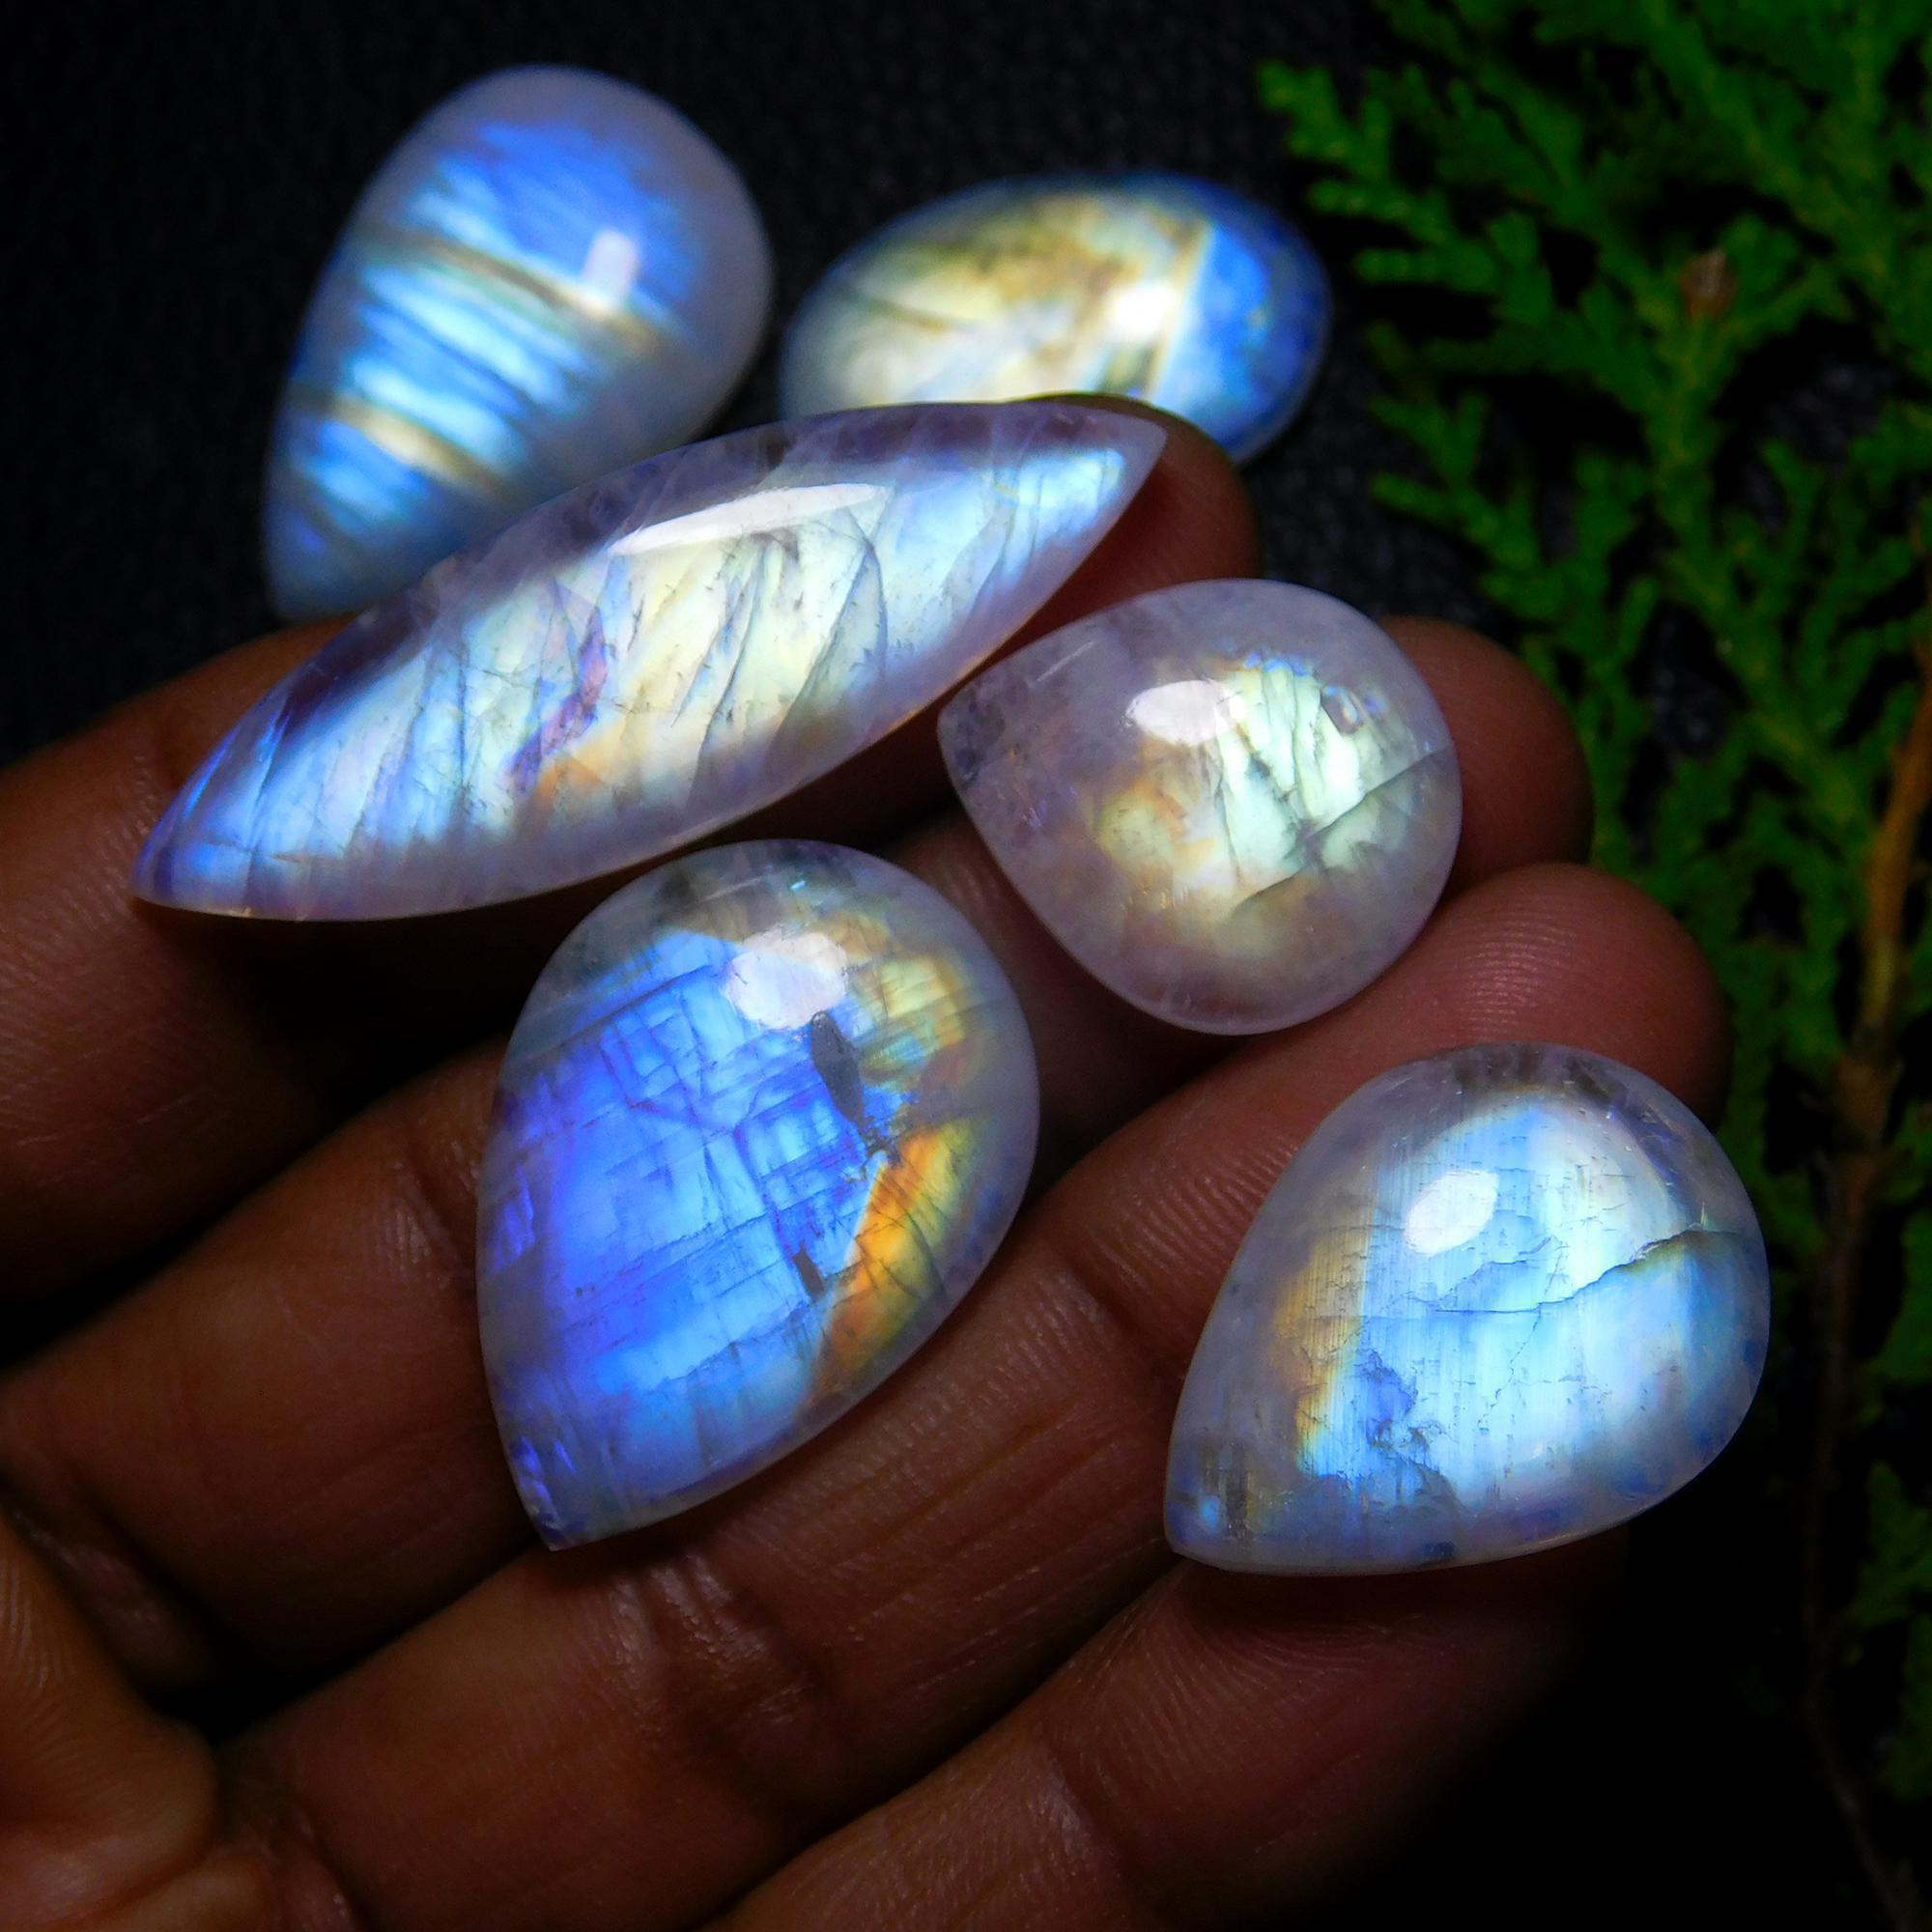 6Pcs 130Cts Natural Rainbow Moonstone Cabochon Blue Fire Loose Gemstone Crystal jewelry supplies wholesale lot gift for her Black Friday 40X14 20X16mm#9418